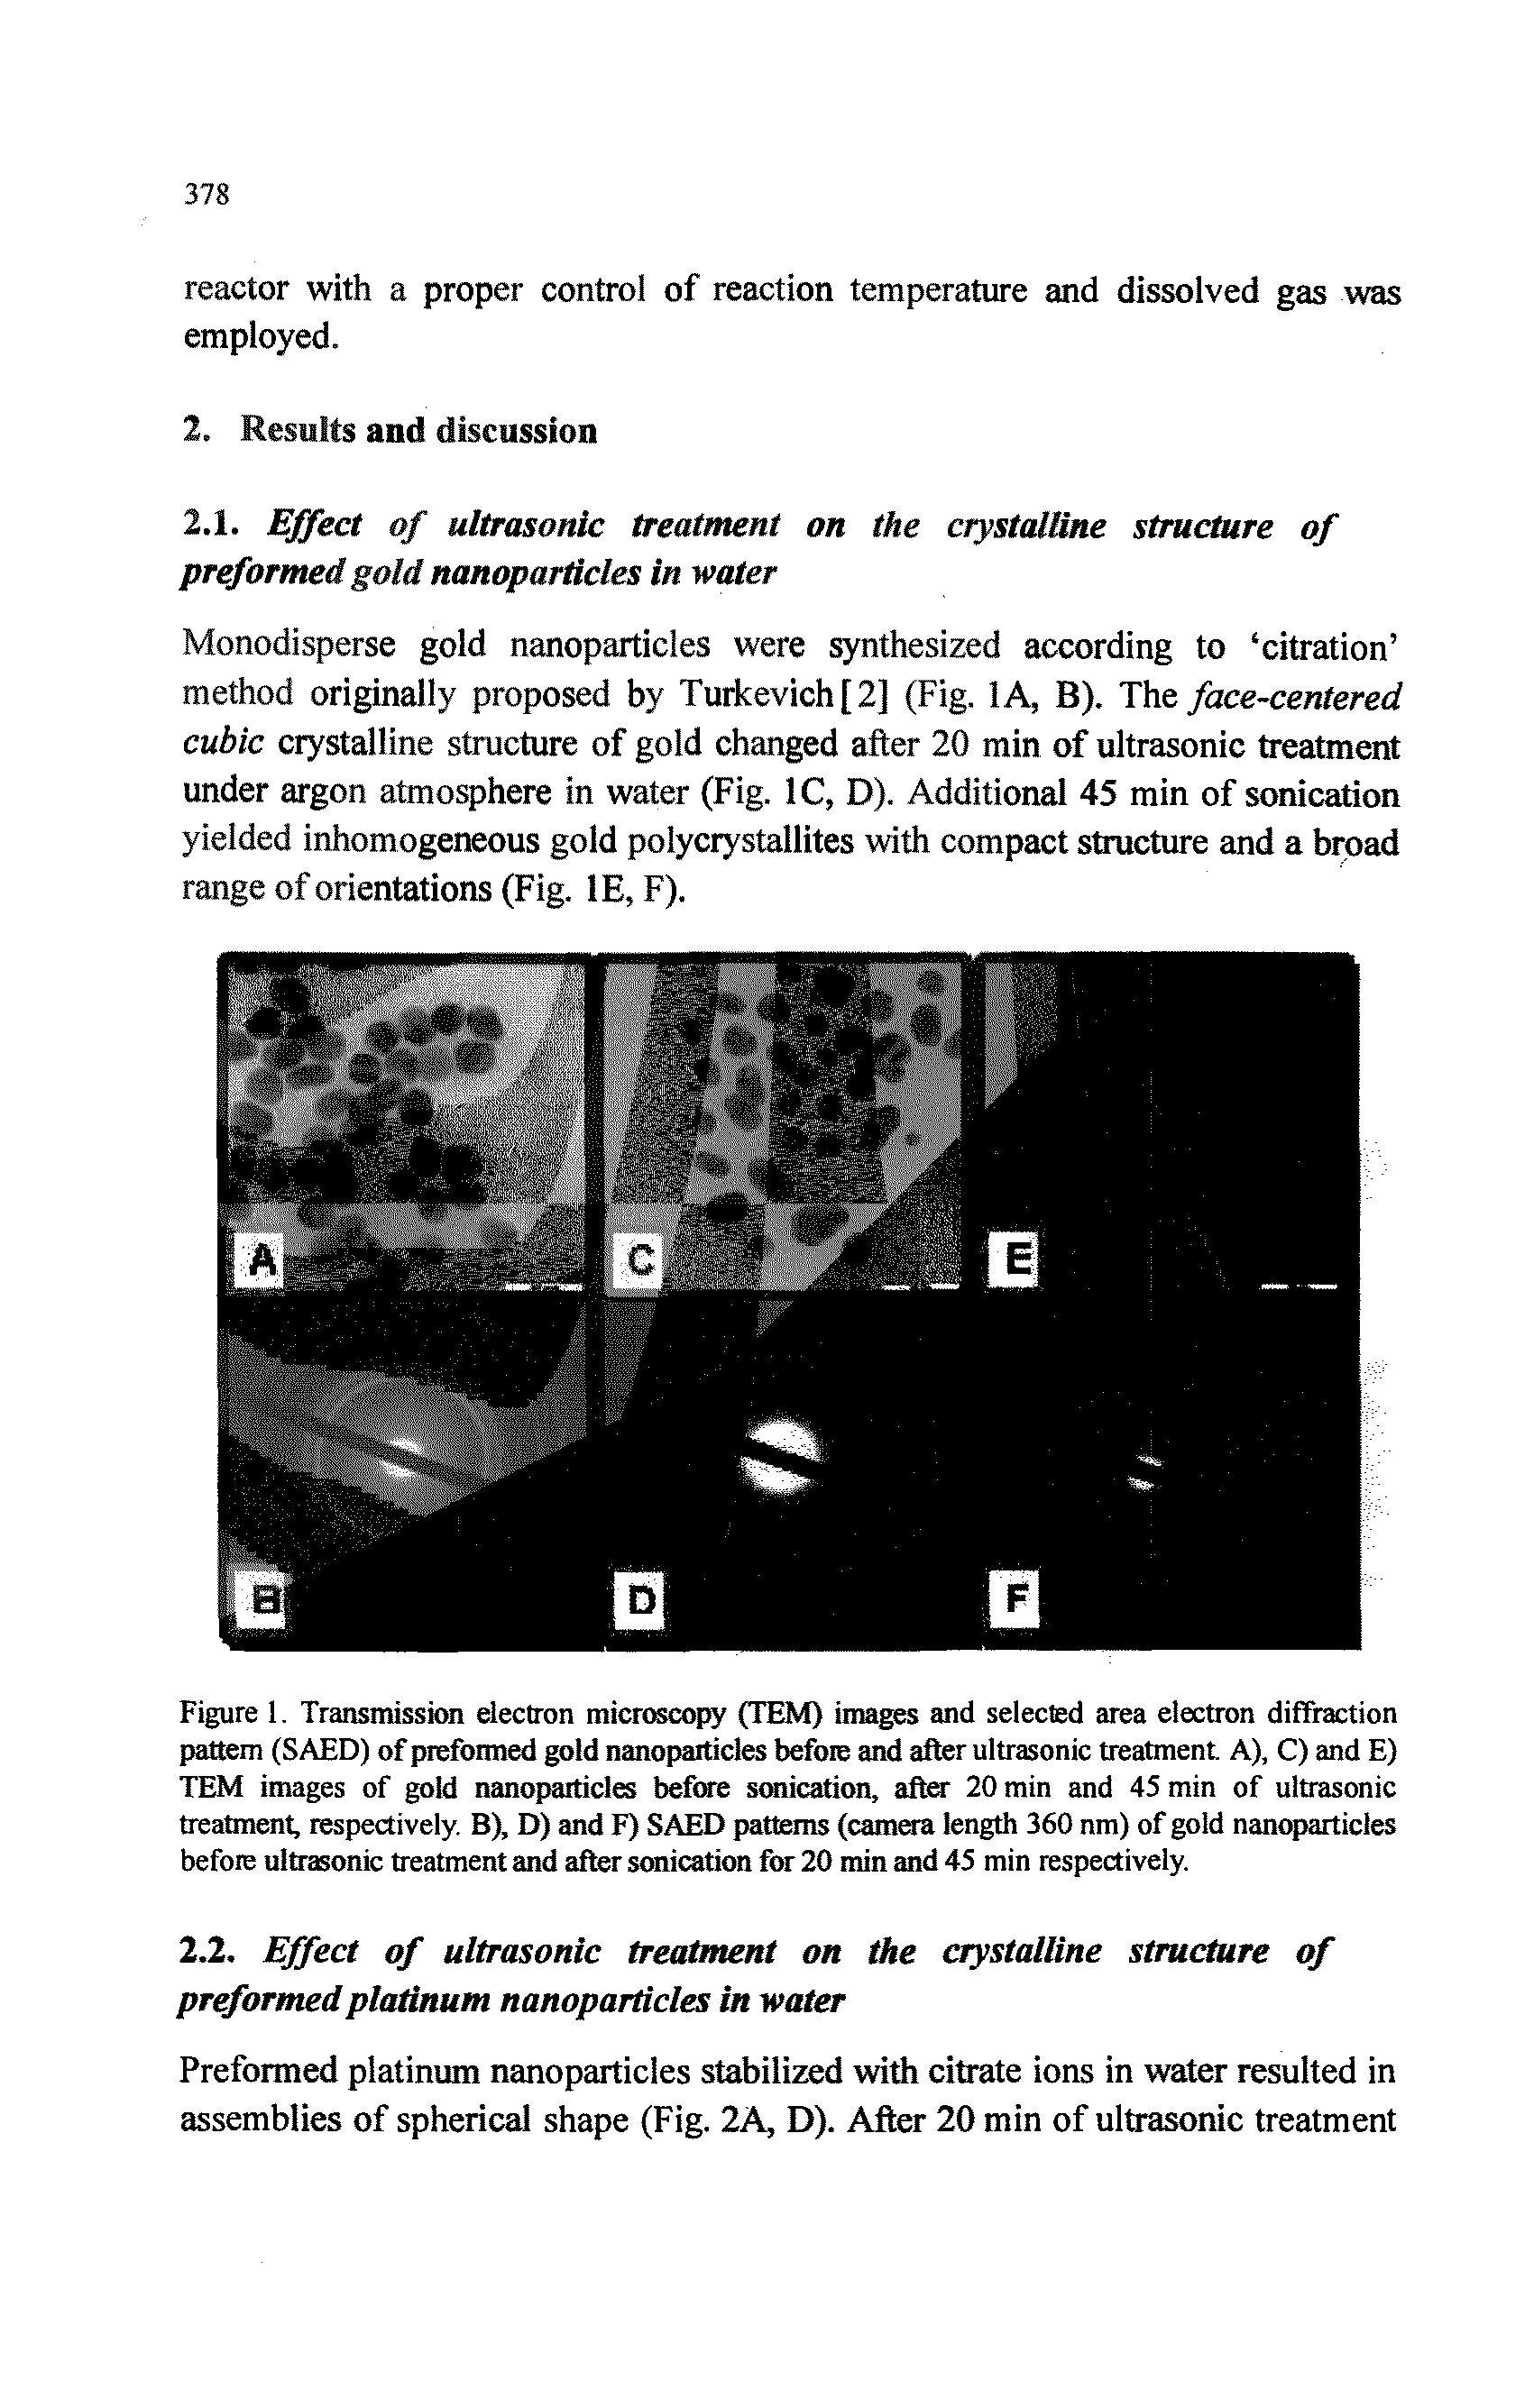 Figure 1. Transmission electron microscopy (TEM) images and selected area electron diffraction pattern (SAED) of preformed gold nanopaiticles before and after ultrasonic treatment A), C) and E) TEM images of gold nanopaiticles bef e soiication, after 20 rain and 45 min of ultrasonic treatment, respectively. B), D) and F) SAED patterns (camera length 360 nm) of gold nanopaiticles before ultrasonic treatment and after sonication for 20 min and 45 min respectively.